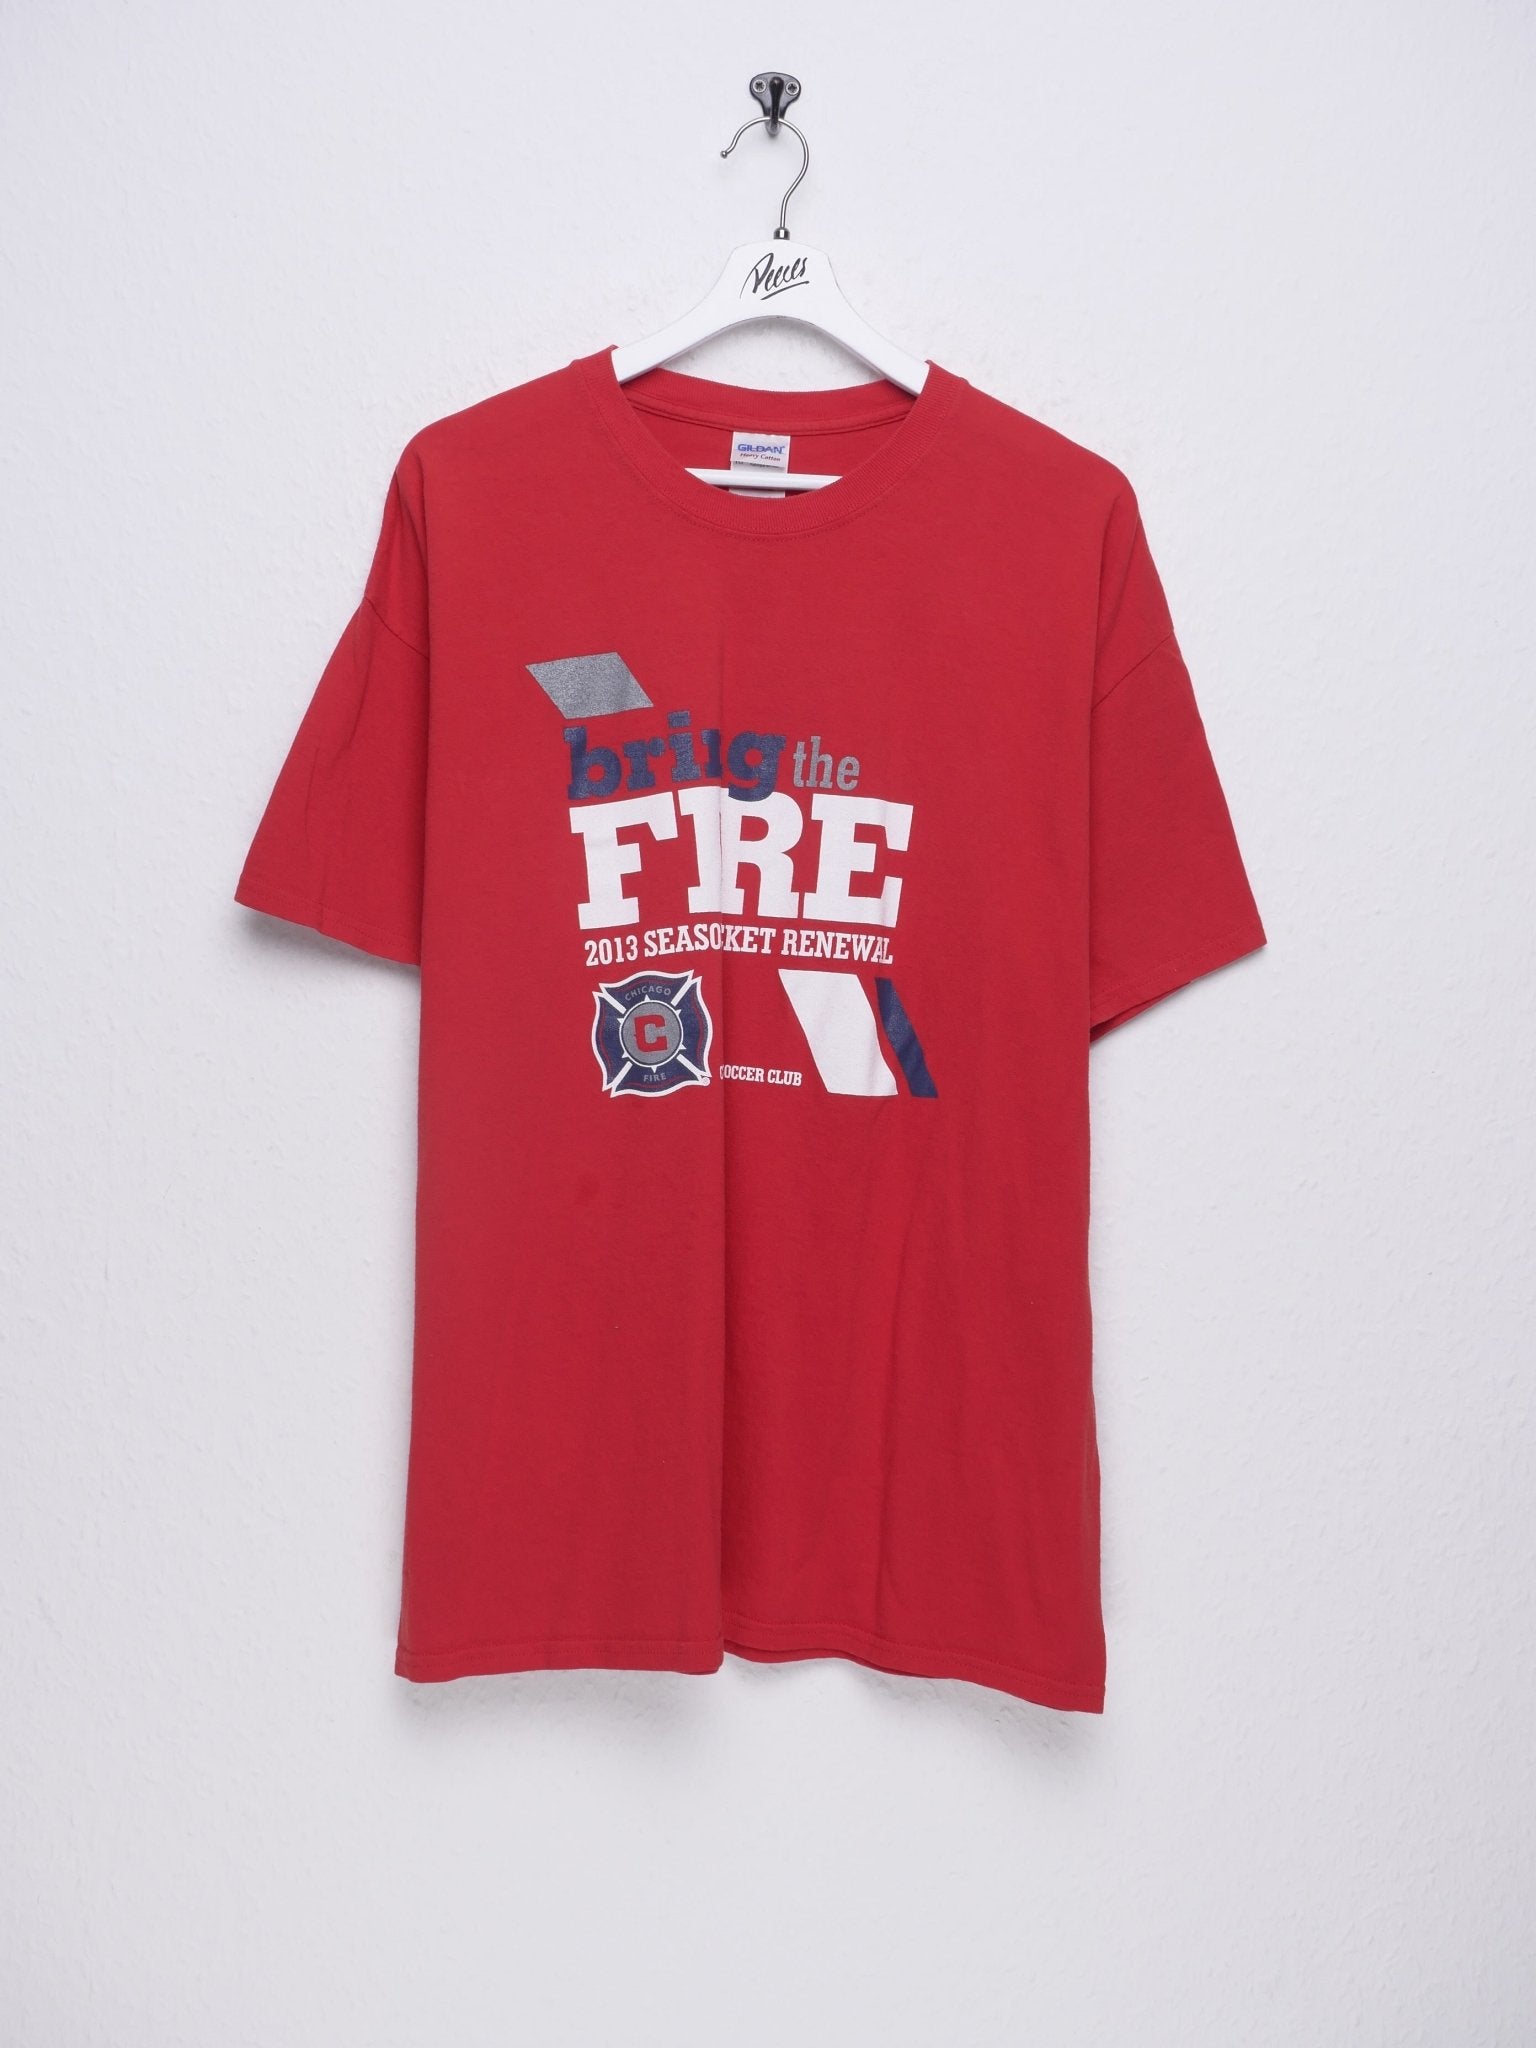 printed Chicago Fire Soccer Club Logo red oversized Shirt - Peeces